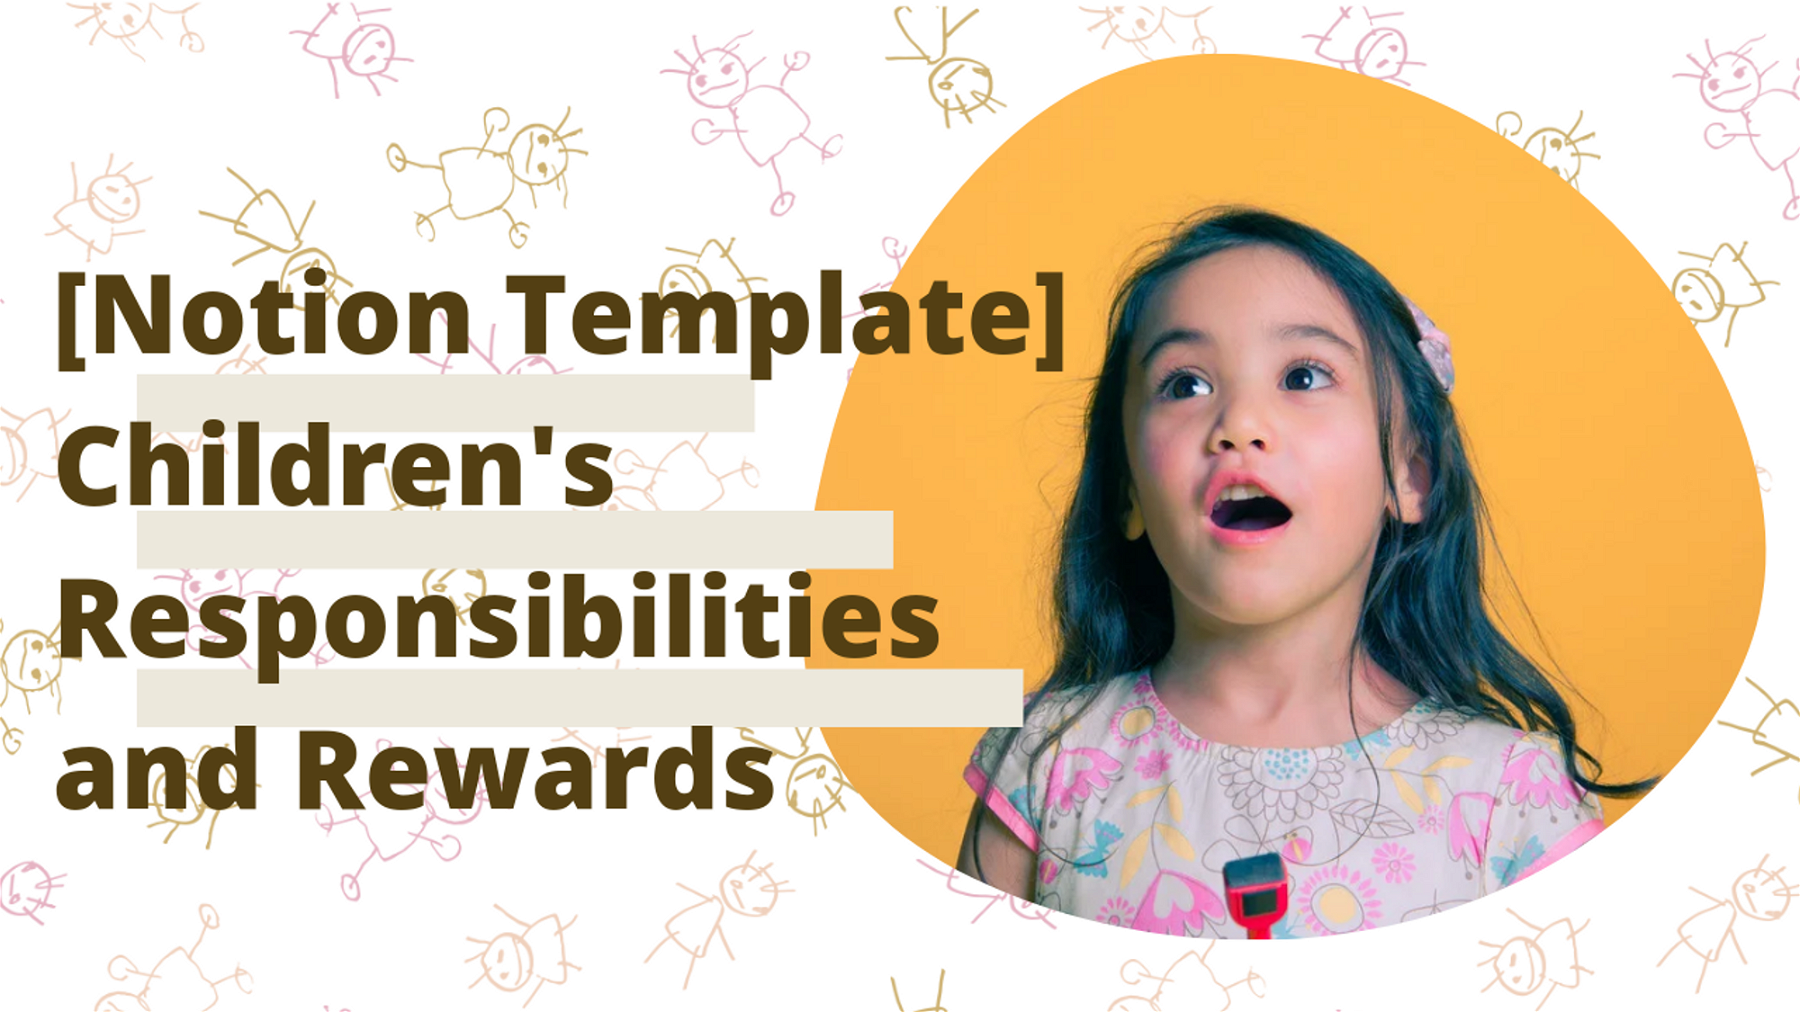 Notion Template Children's Responsibilities and Rewards